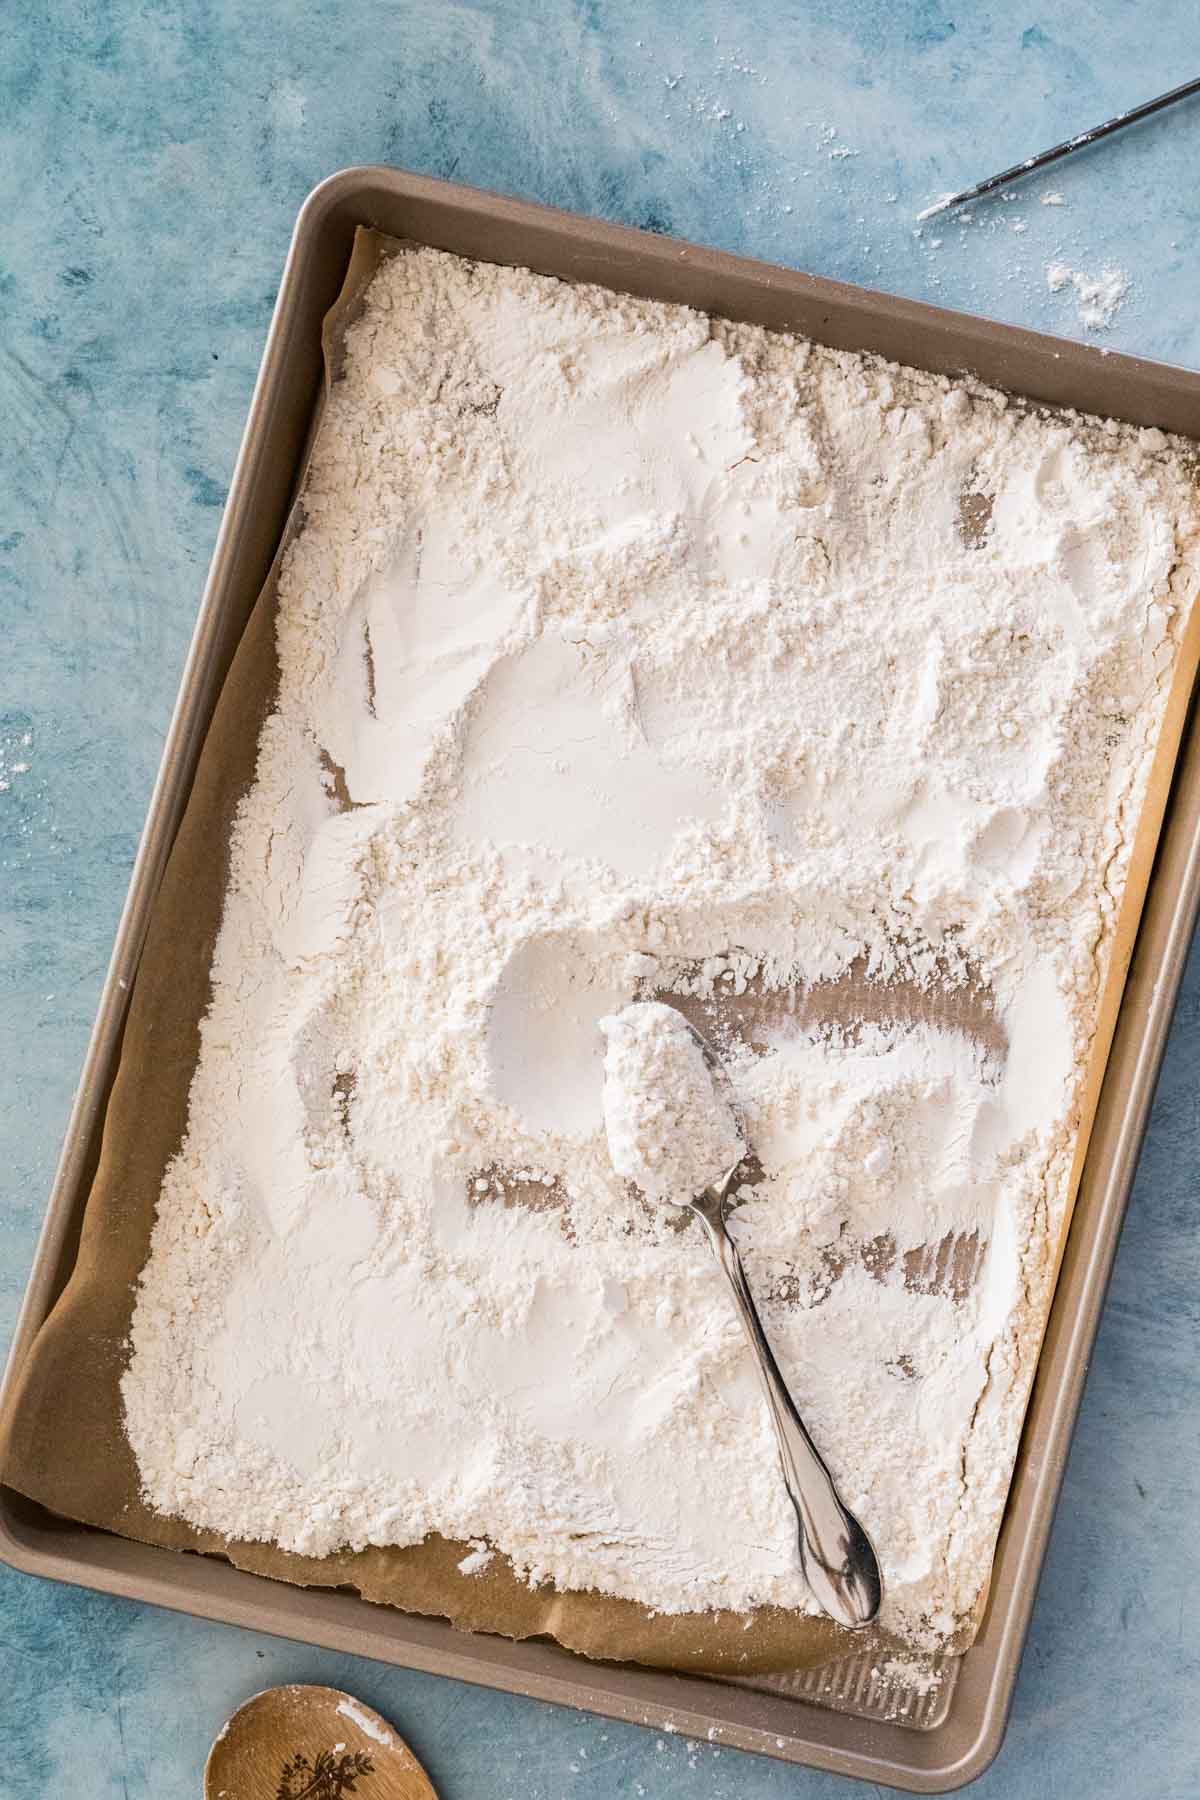 Sheet pan of flour that's been stirred by a spoon.